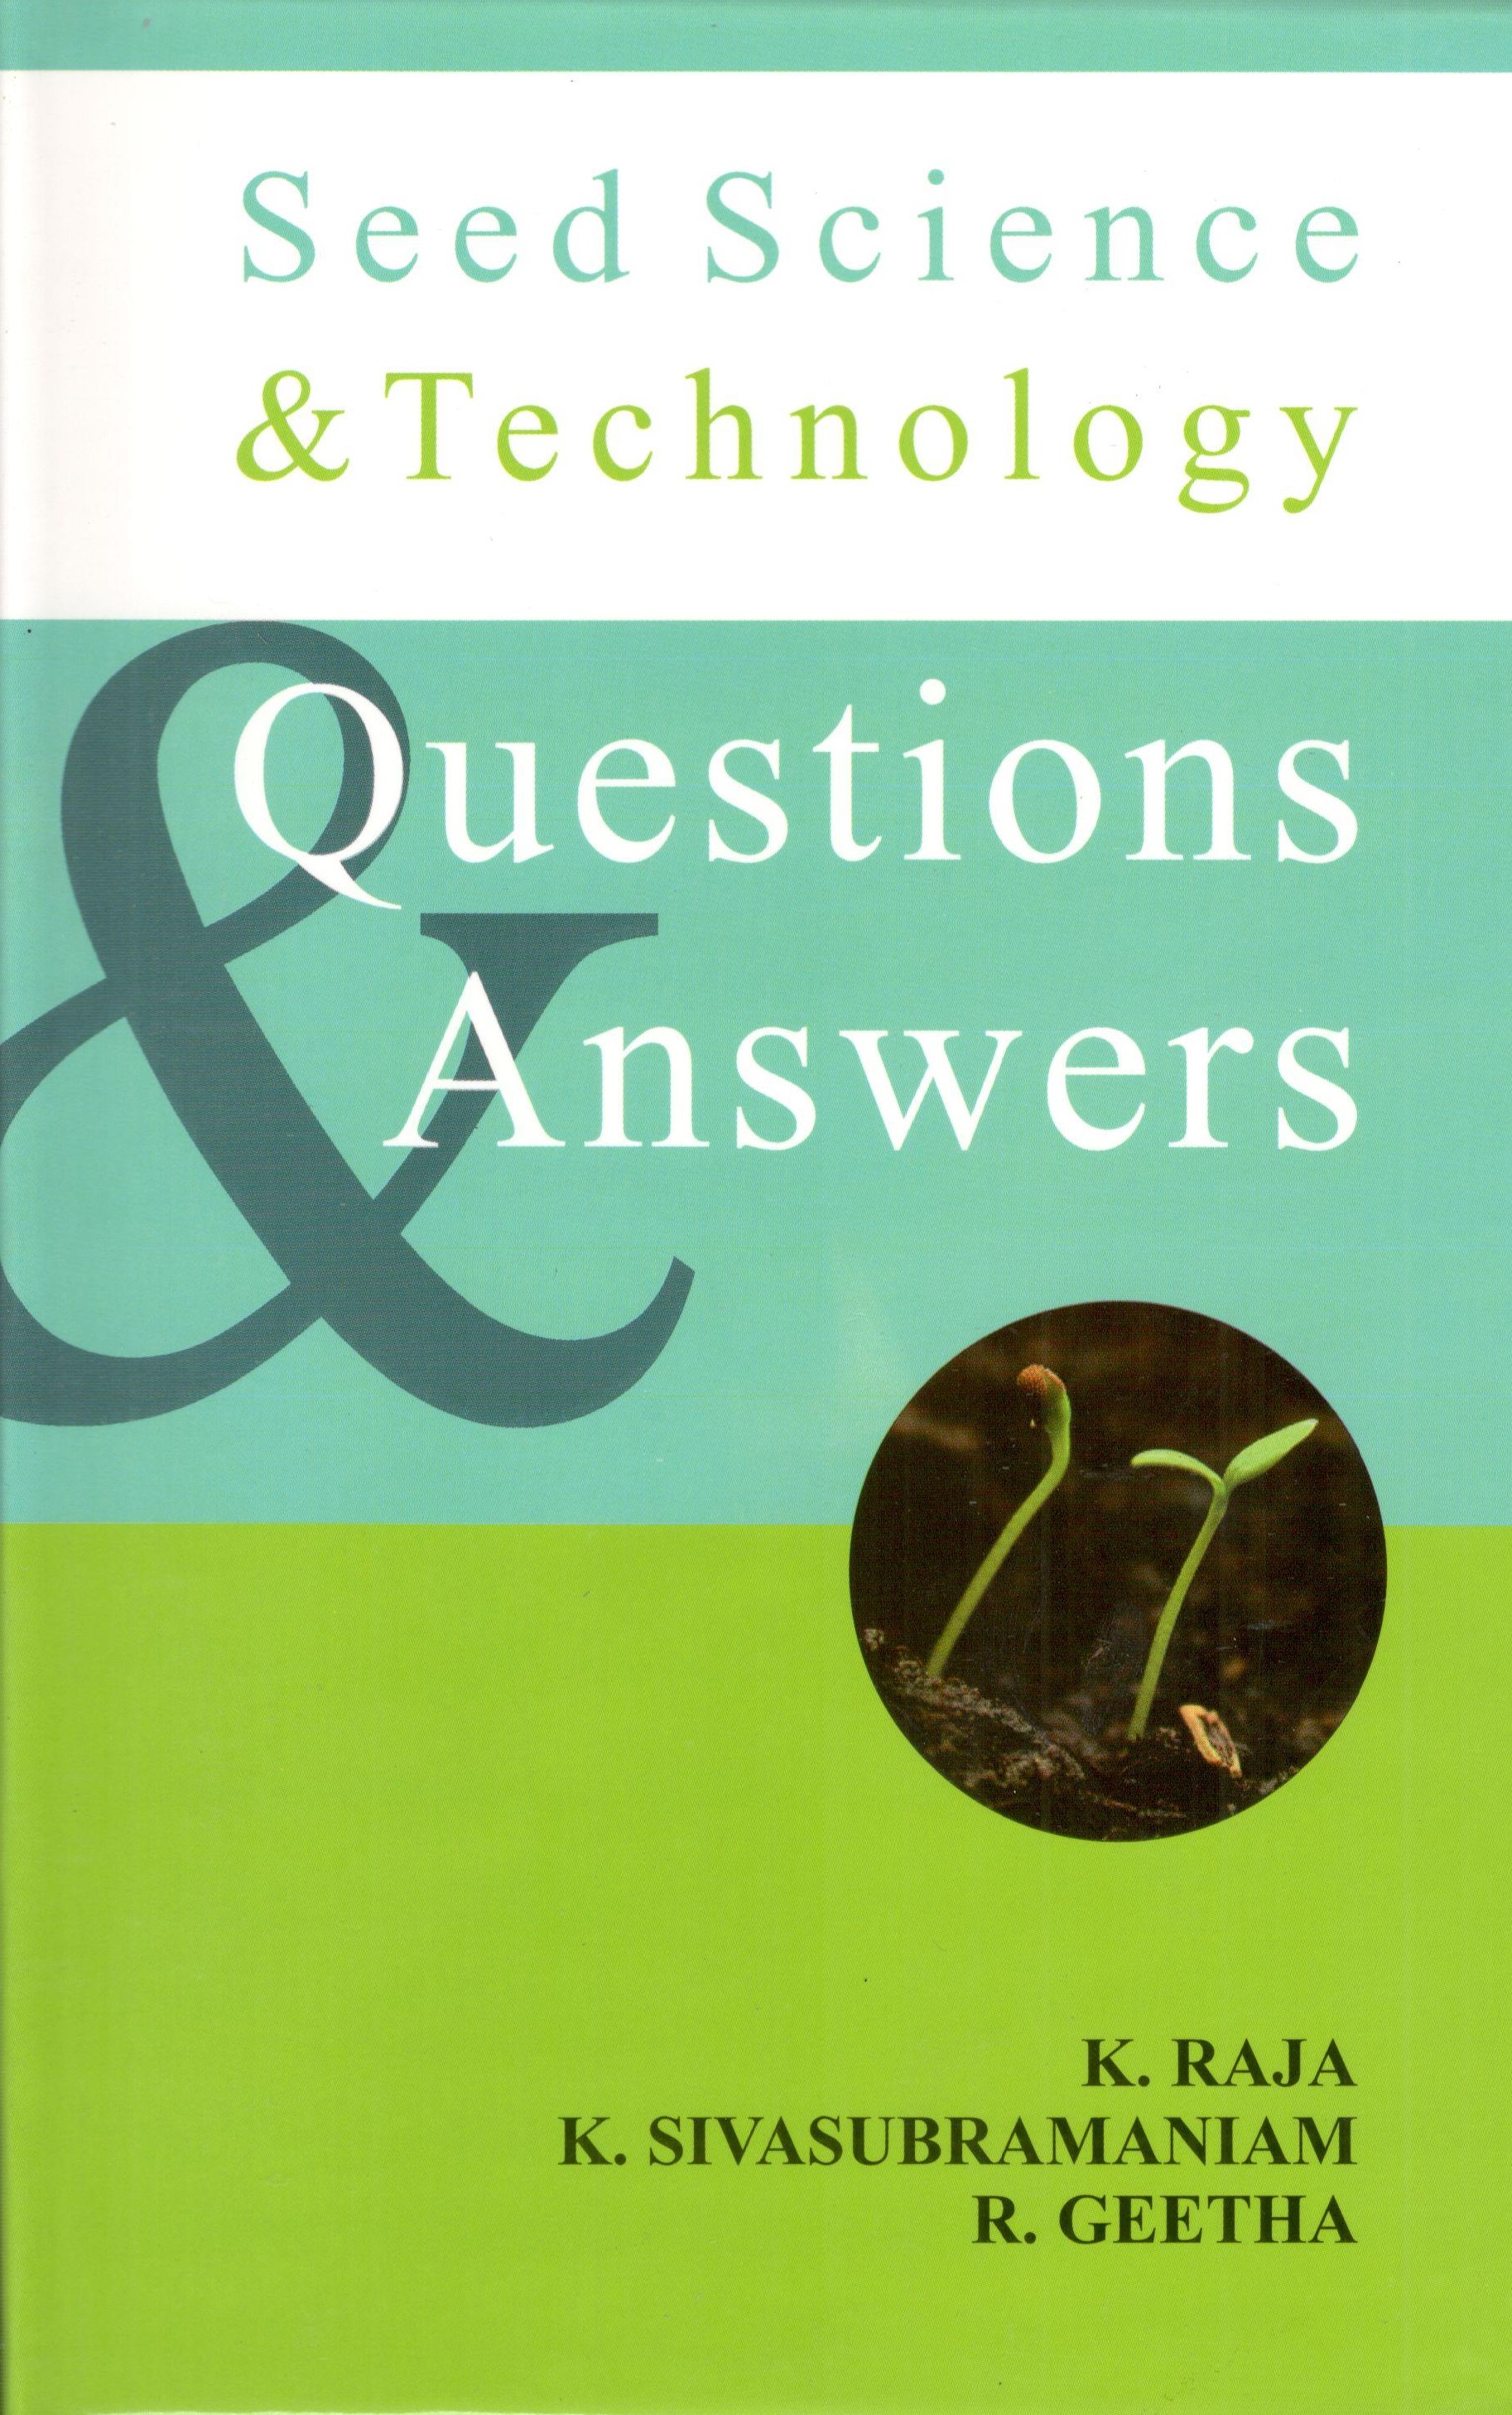 Seed Science & Technology Questions & Answers